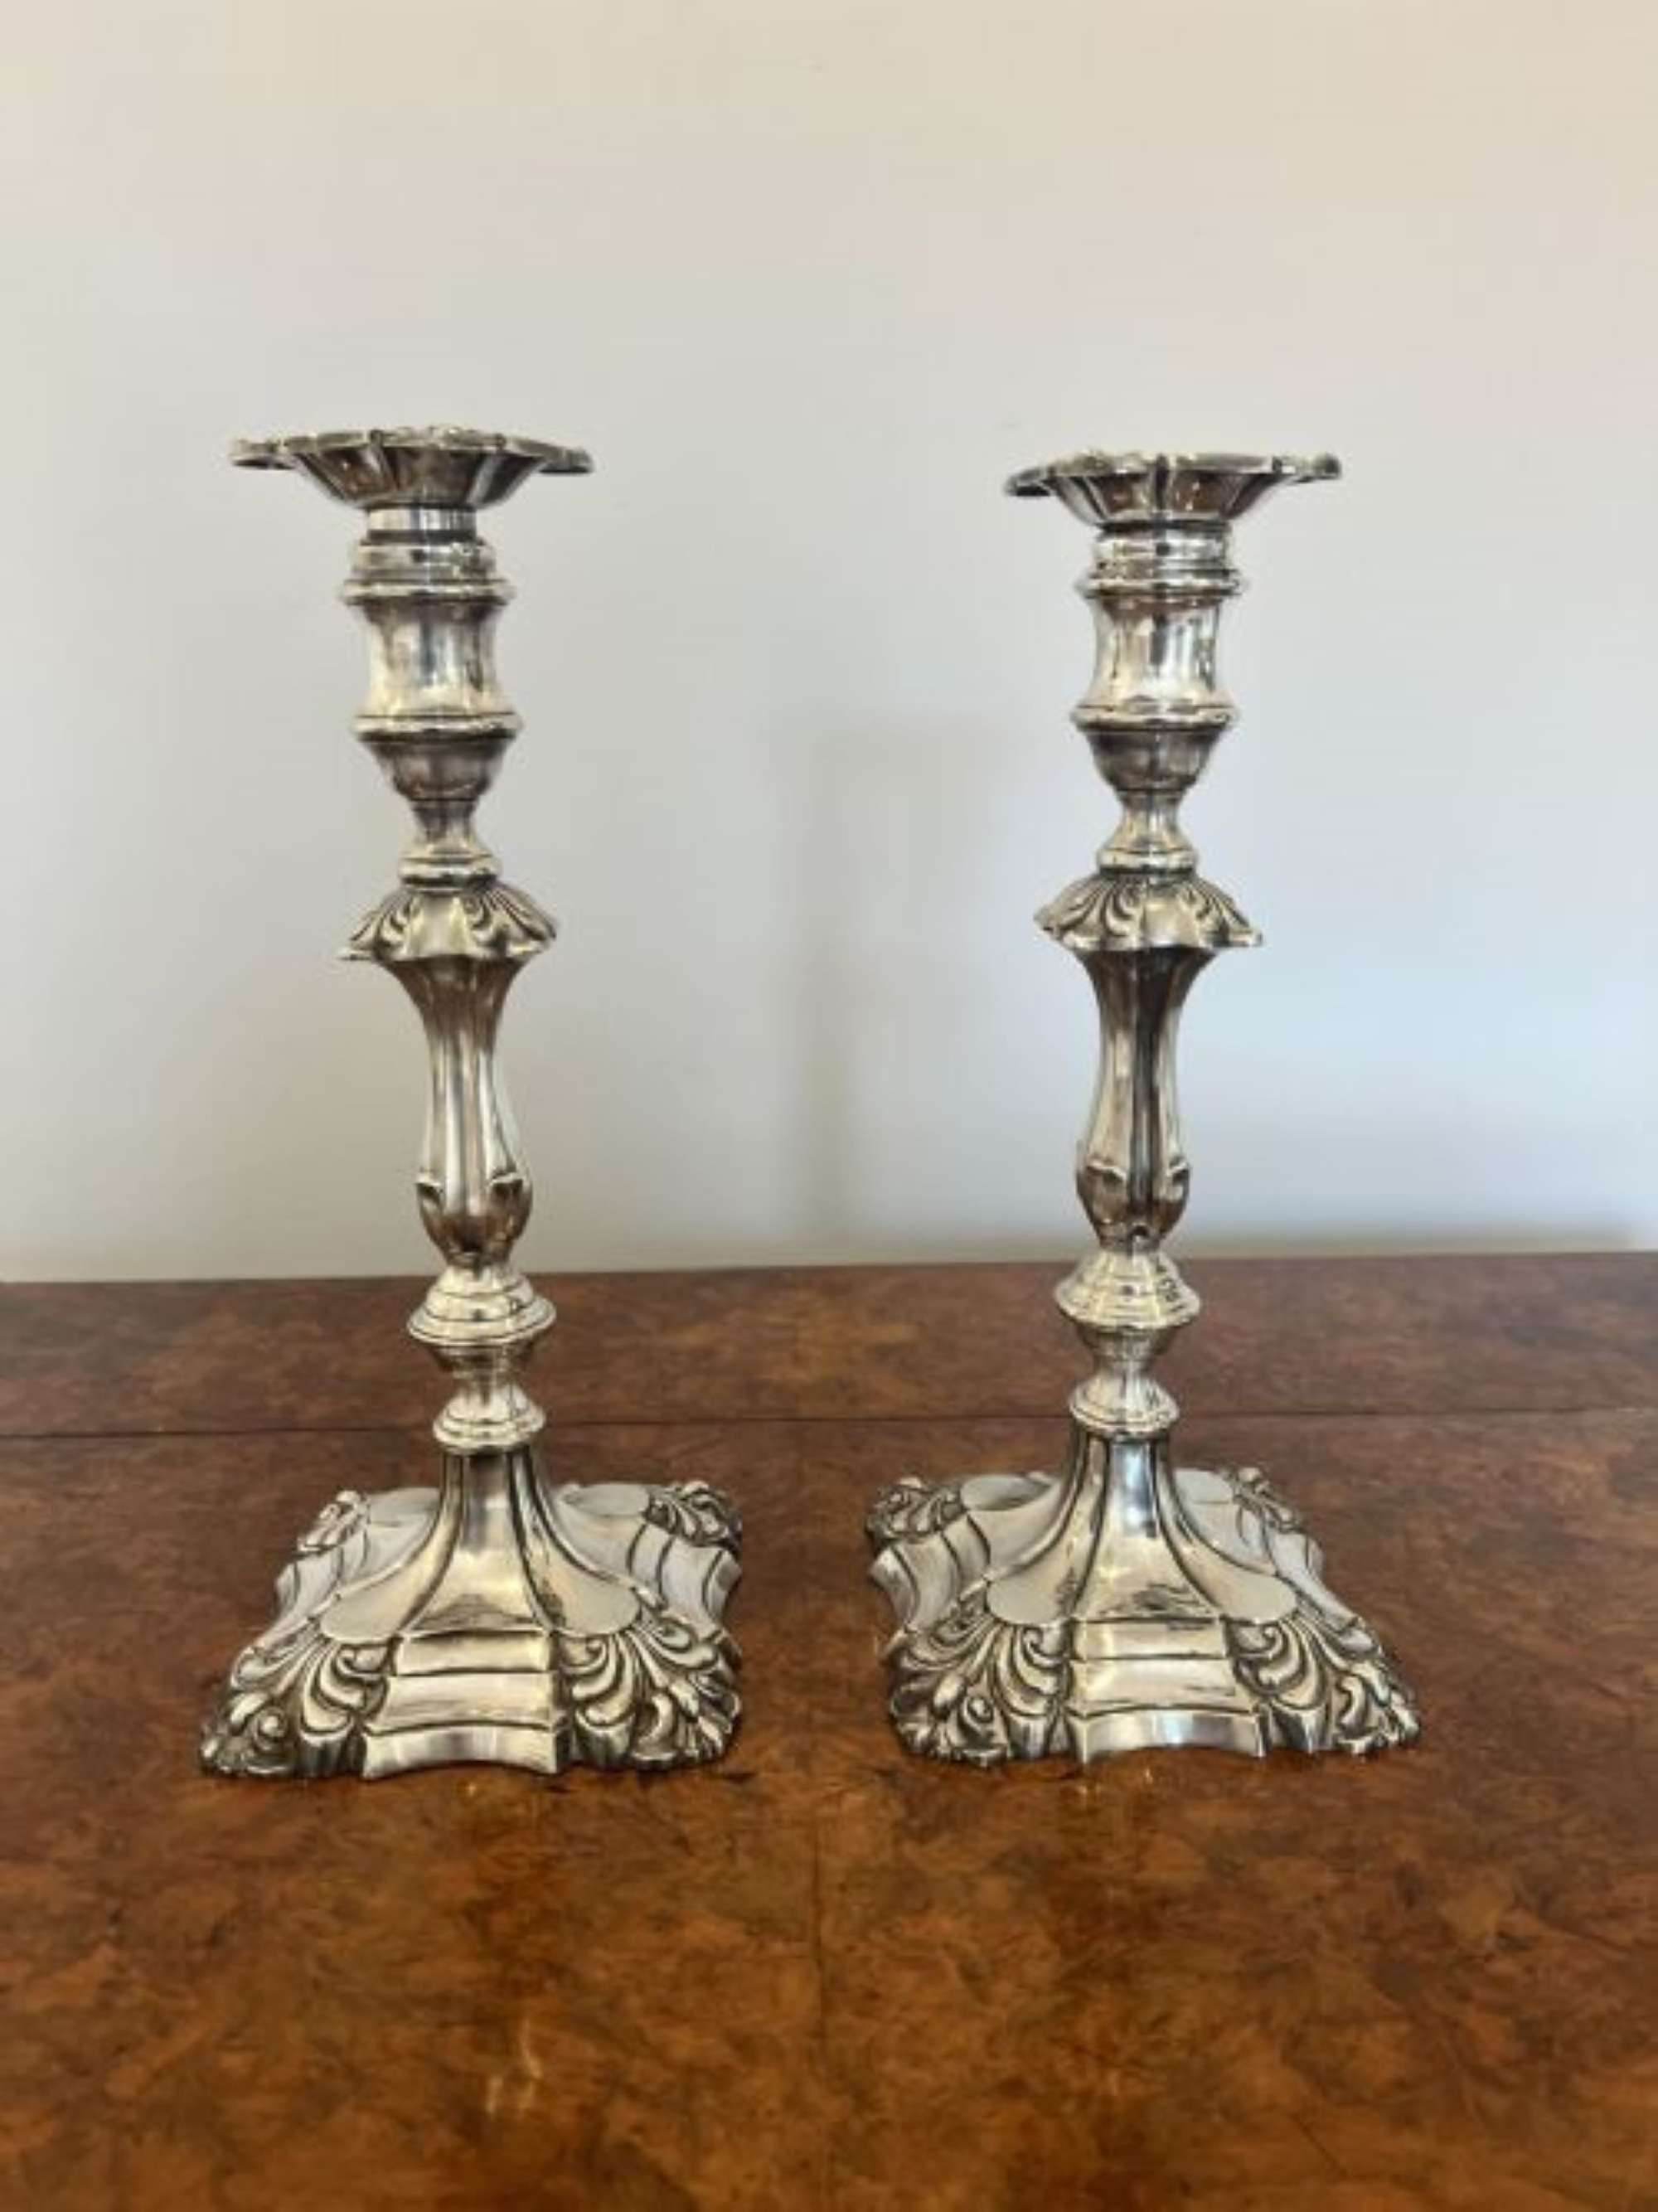 Large Pair Of Quality Antique Victorian Ornate Candlesticks